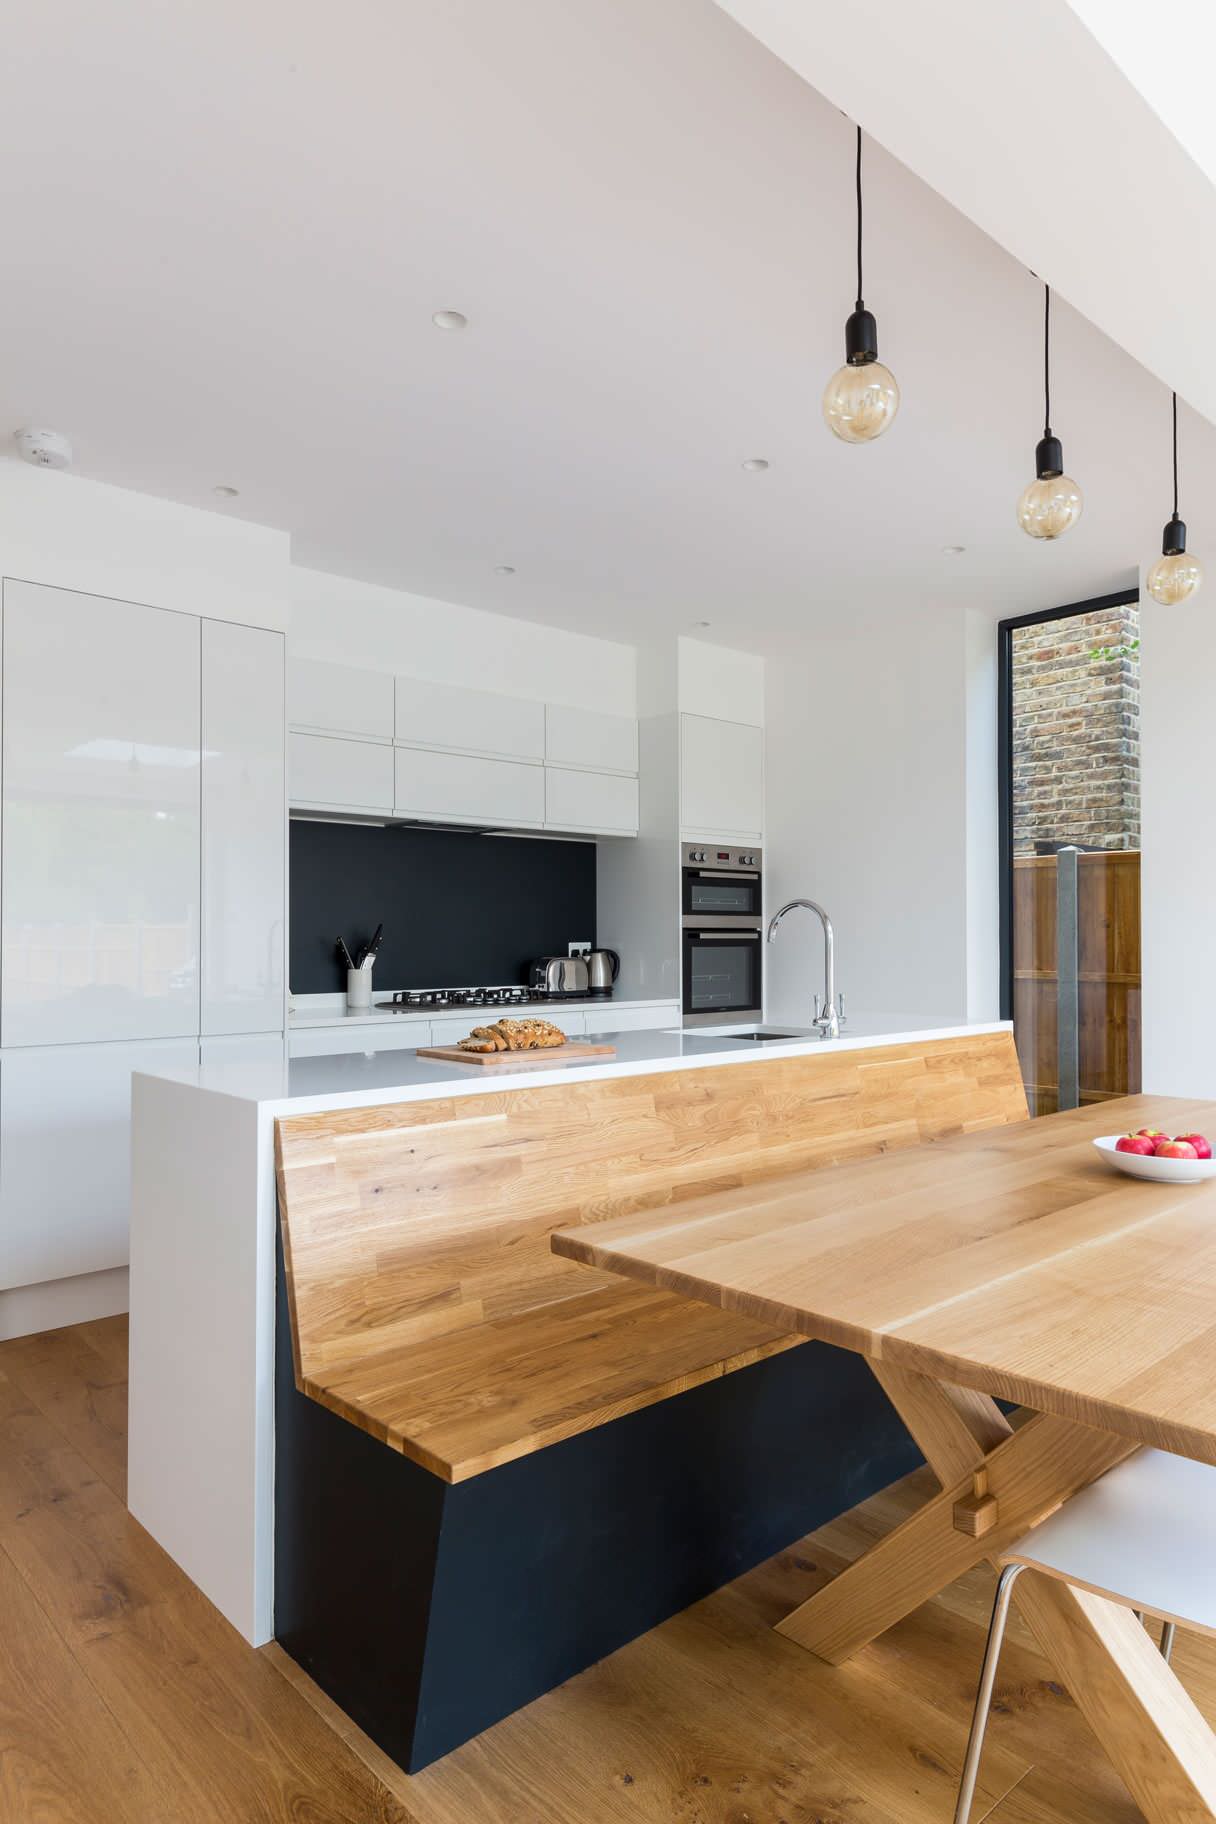 Are These the Best Kitchen Island Seating Ideas? | Houzz UK